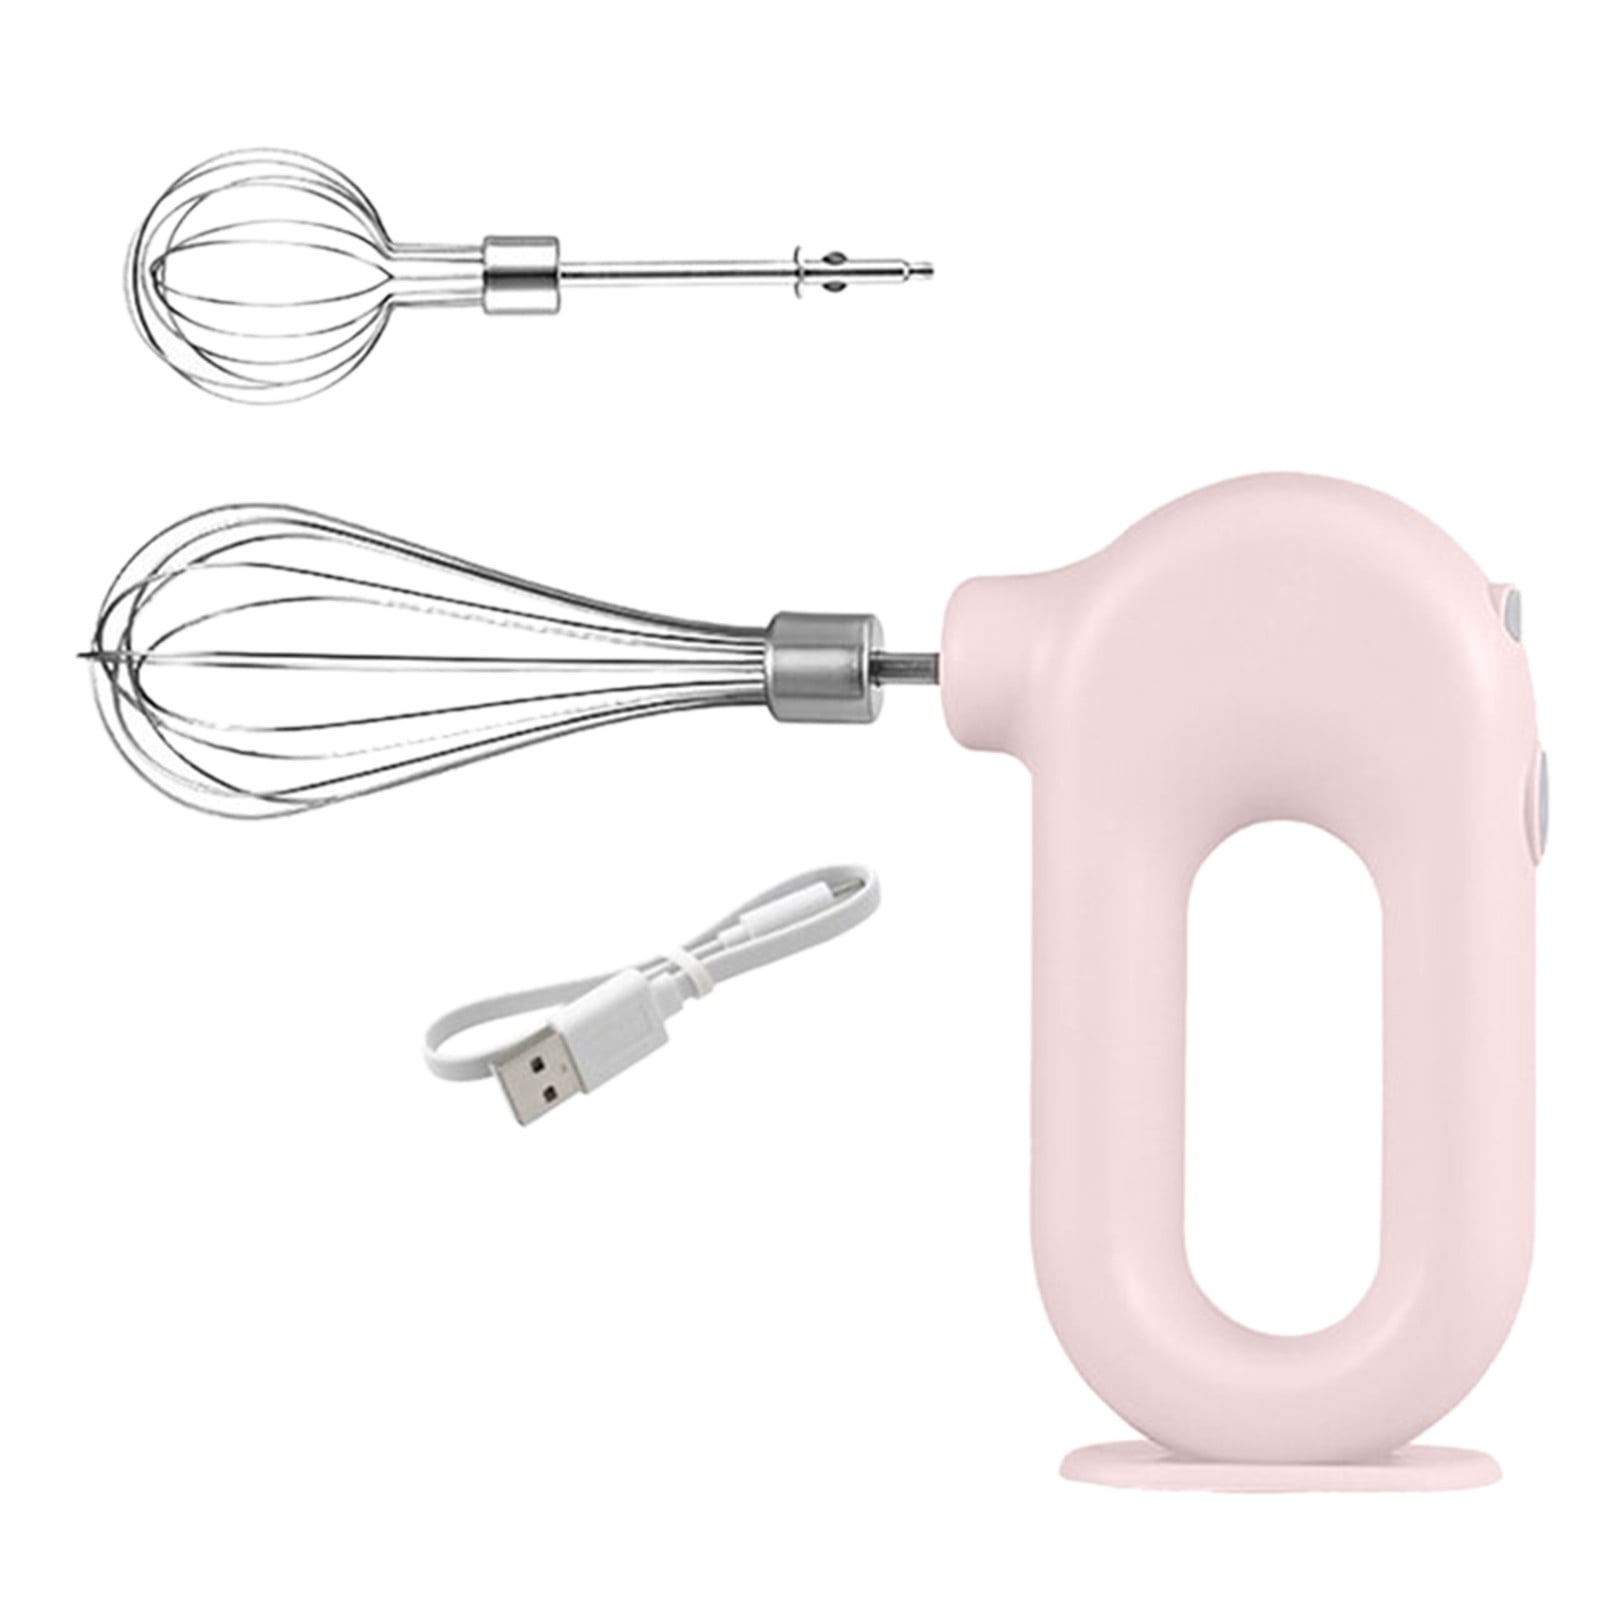 Durable Hand-Held Manual Mixers Kitchen Hand Held, Safe Hand Mixer, for Making Cakes for Machine Baking Tool Making Waffles Making Batters